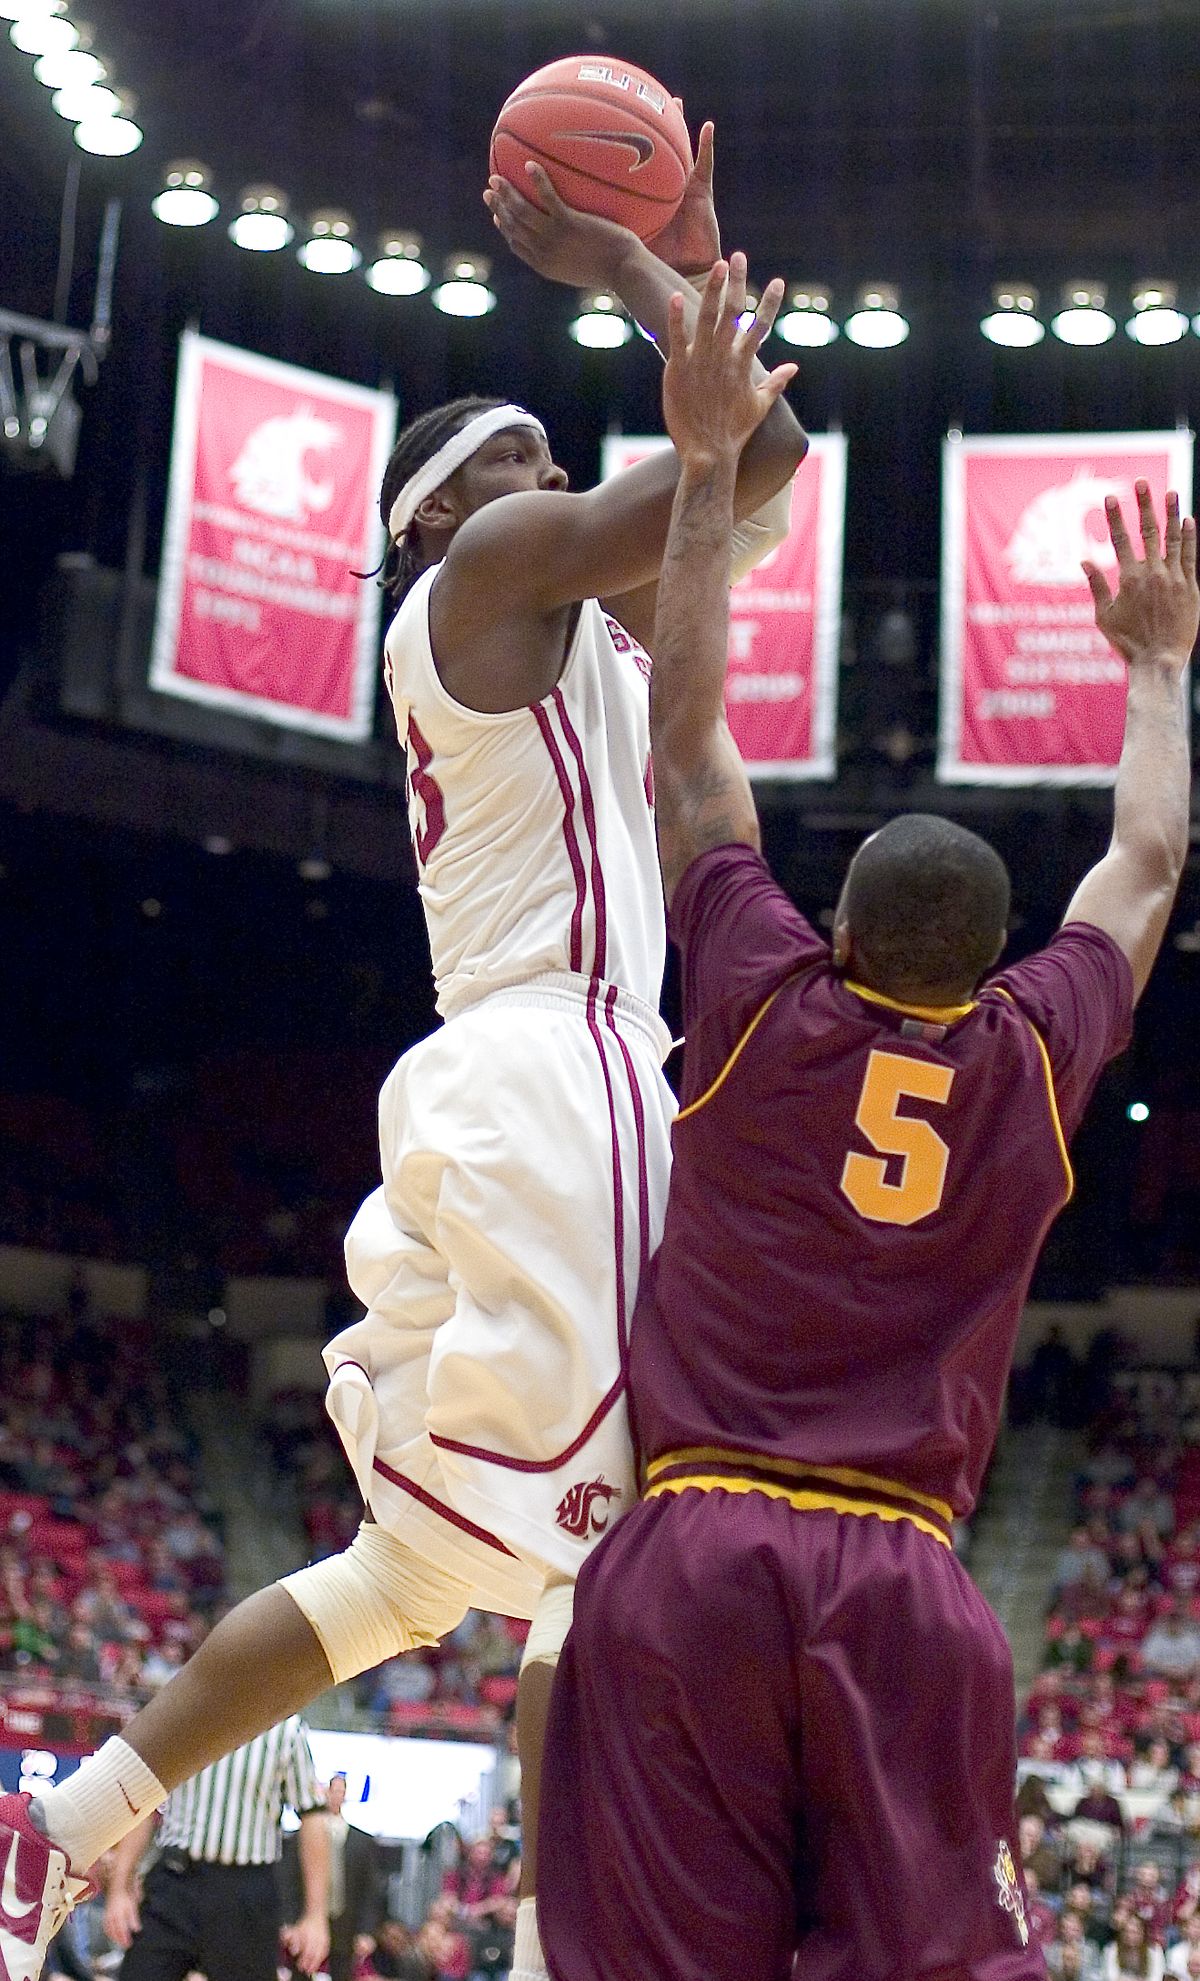 Washington State forward DeAngelo Casto, left, scores over Arizona State forward Kyle Cain (5) during the first half of an NCAA college basketball game Thursday, Jan. 20, 2011, in Pullman, Wash. (Dean Hare / Associated Press)